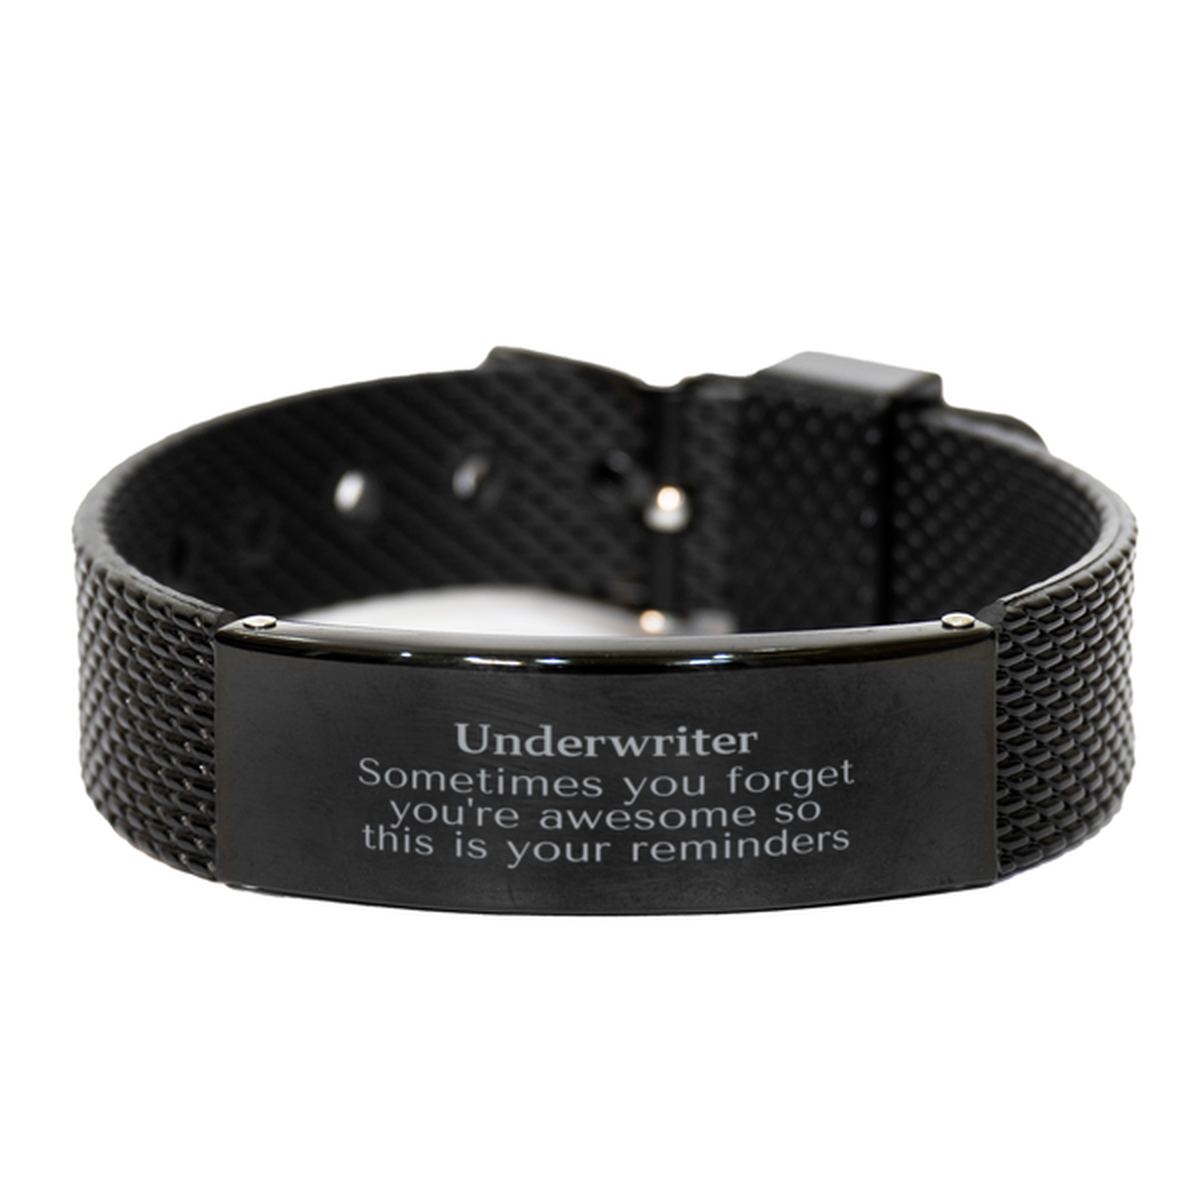 Sentimental Underwriter Black Shark Mesh Bracelet, Underwriter Sometimes you forget you're awesome so this is your reminders, Graduation Christmas Birthday Gifts for Underwriter, Men, Women, Coworkers